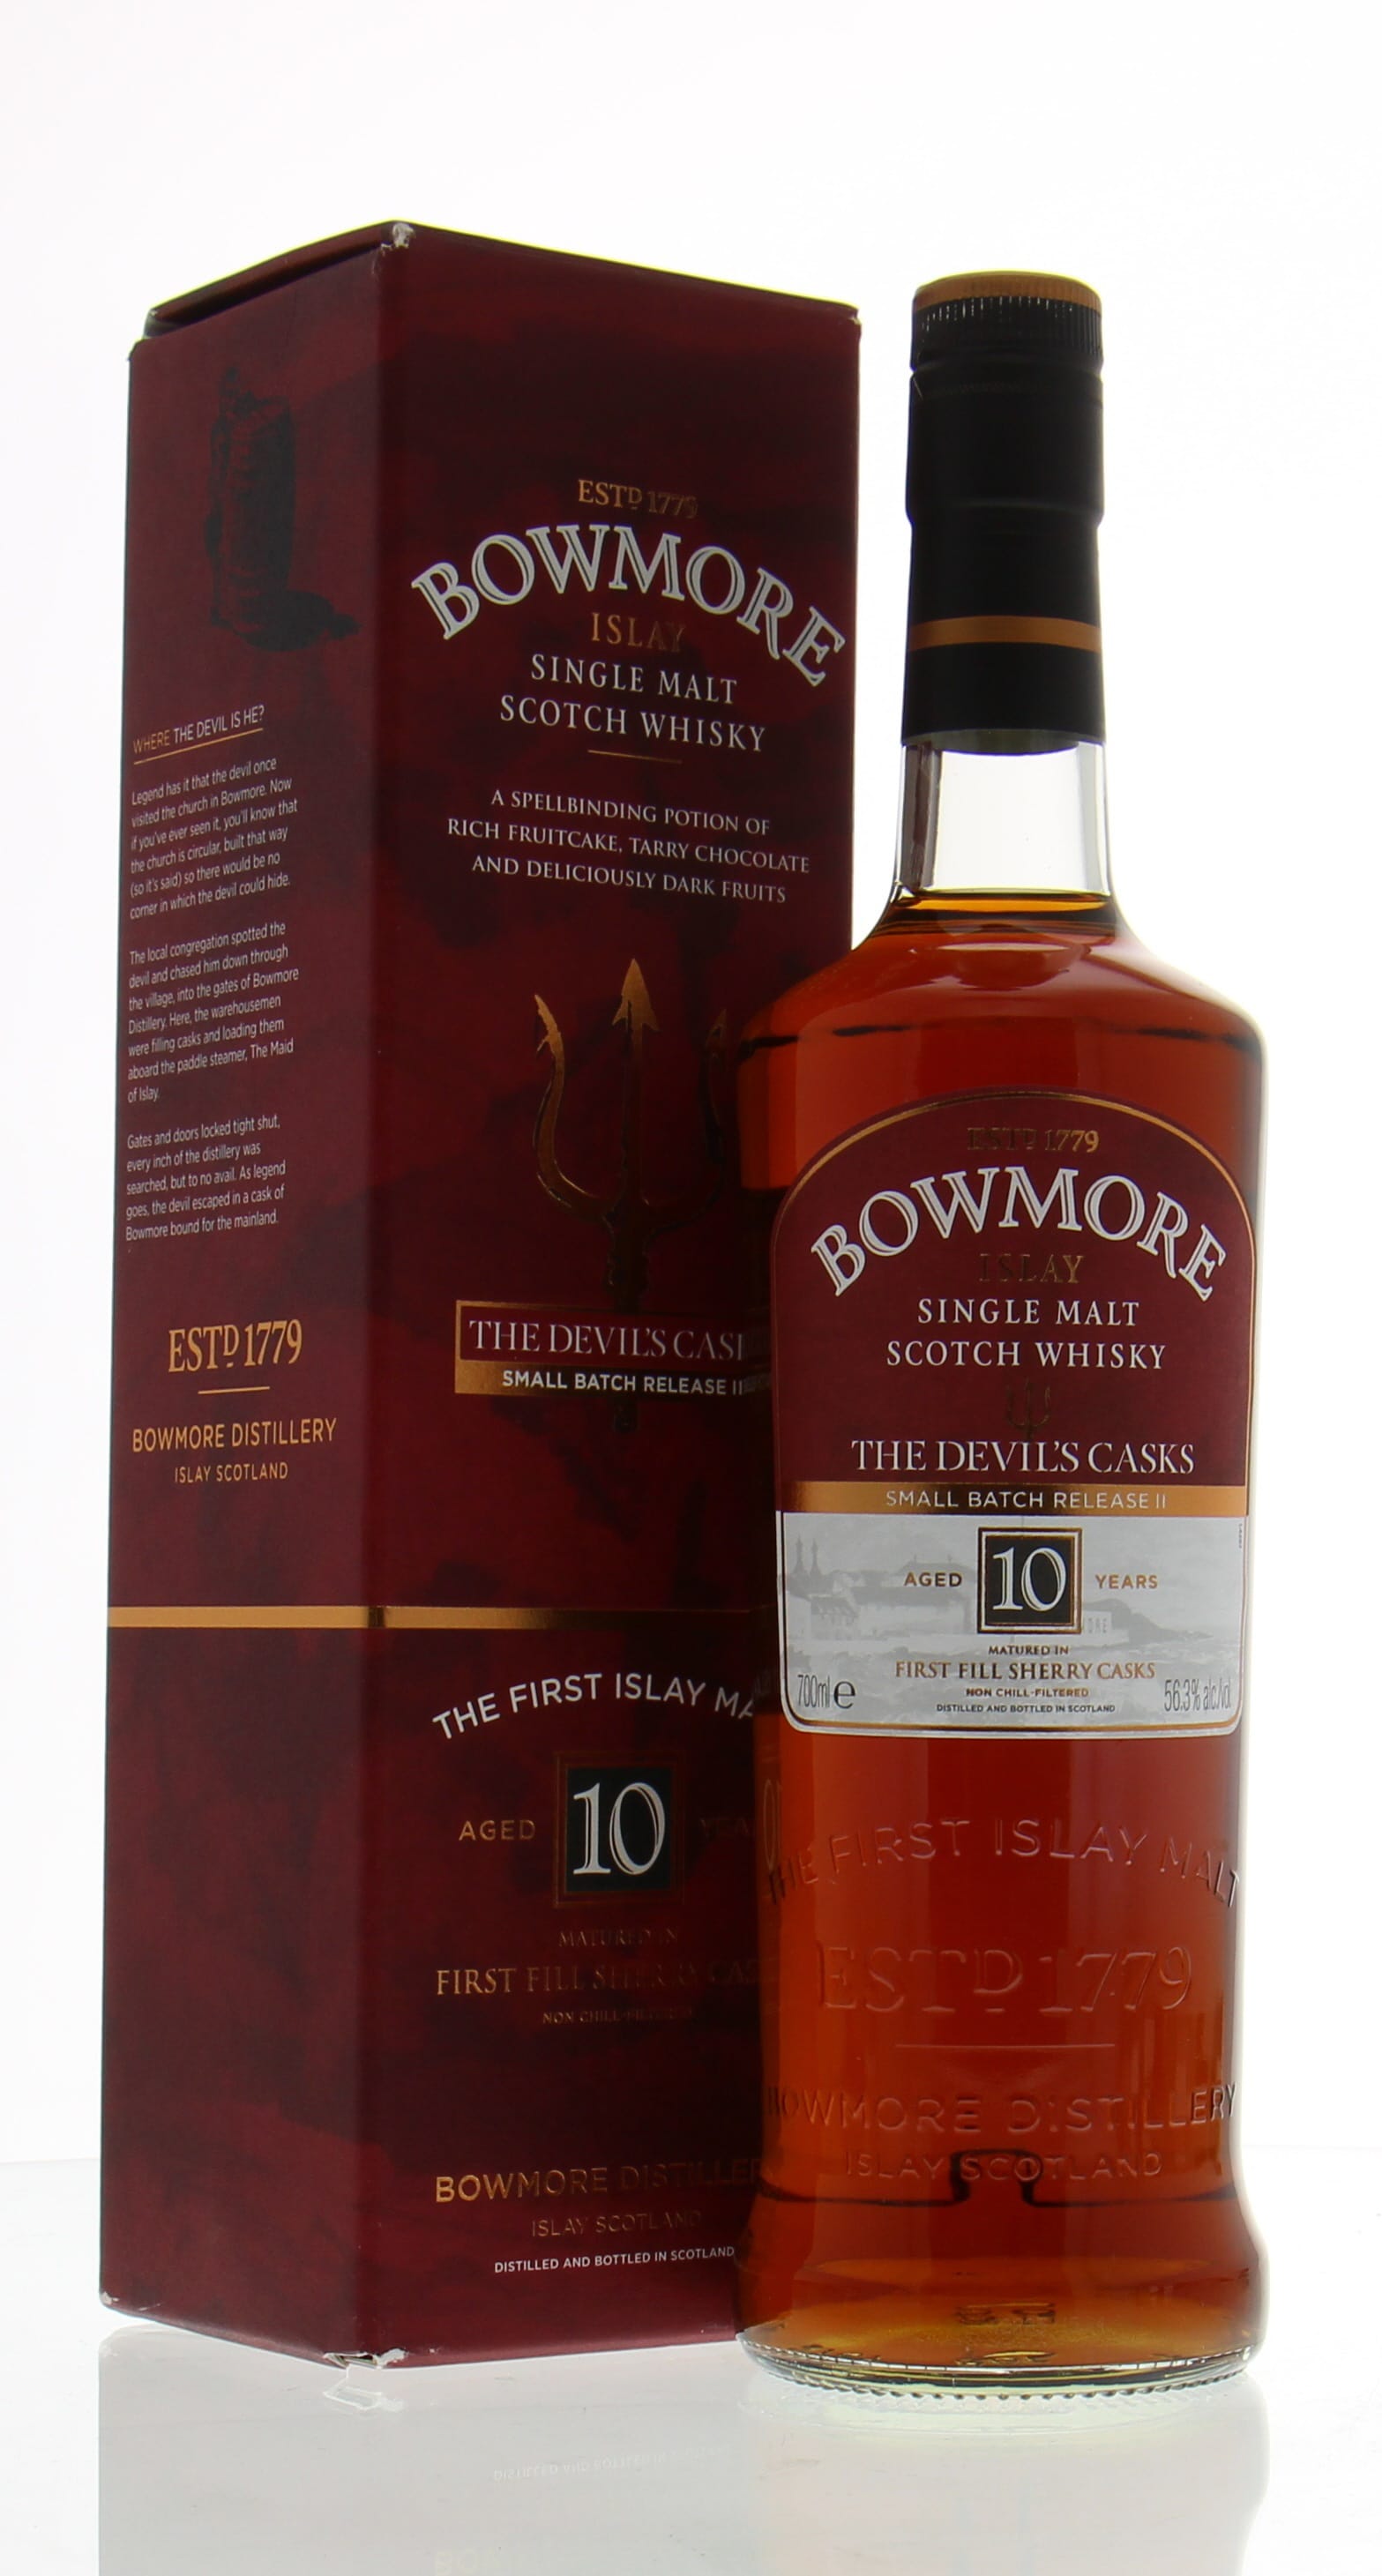 Bowmore - The Devil's Cask 2nd release 10 years old 56.3% NV Perfect